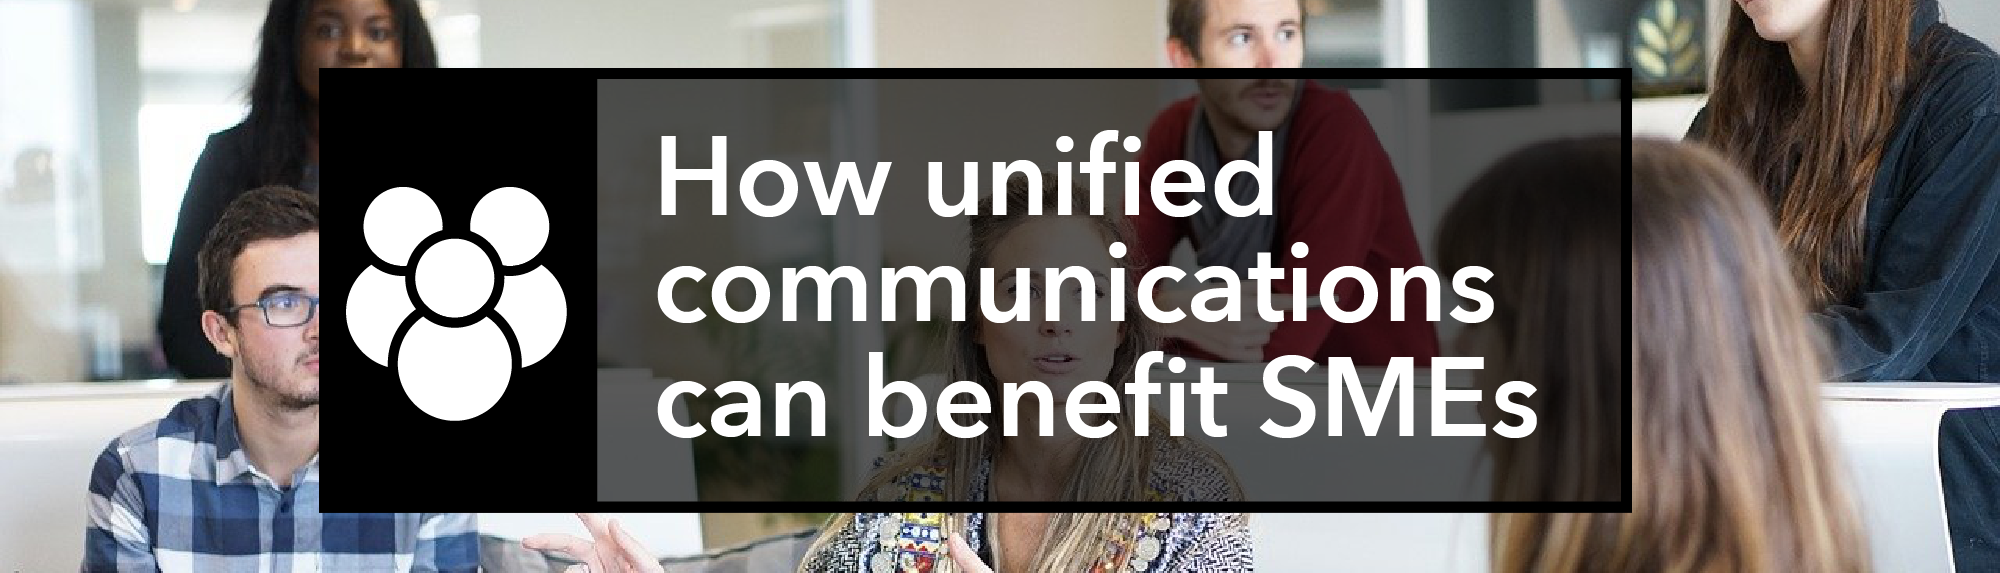 Unified communications for SMEs